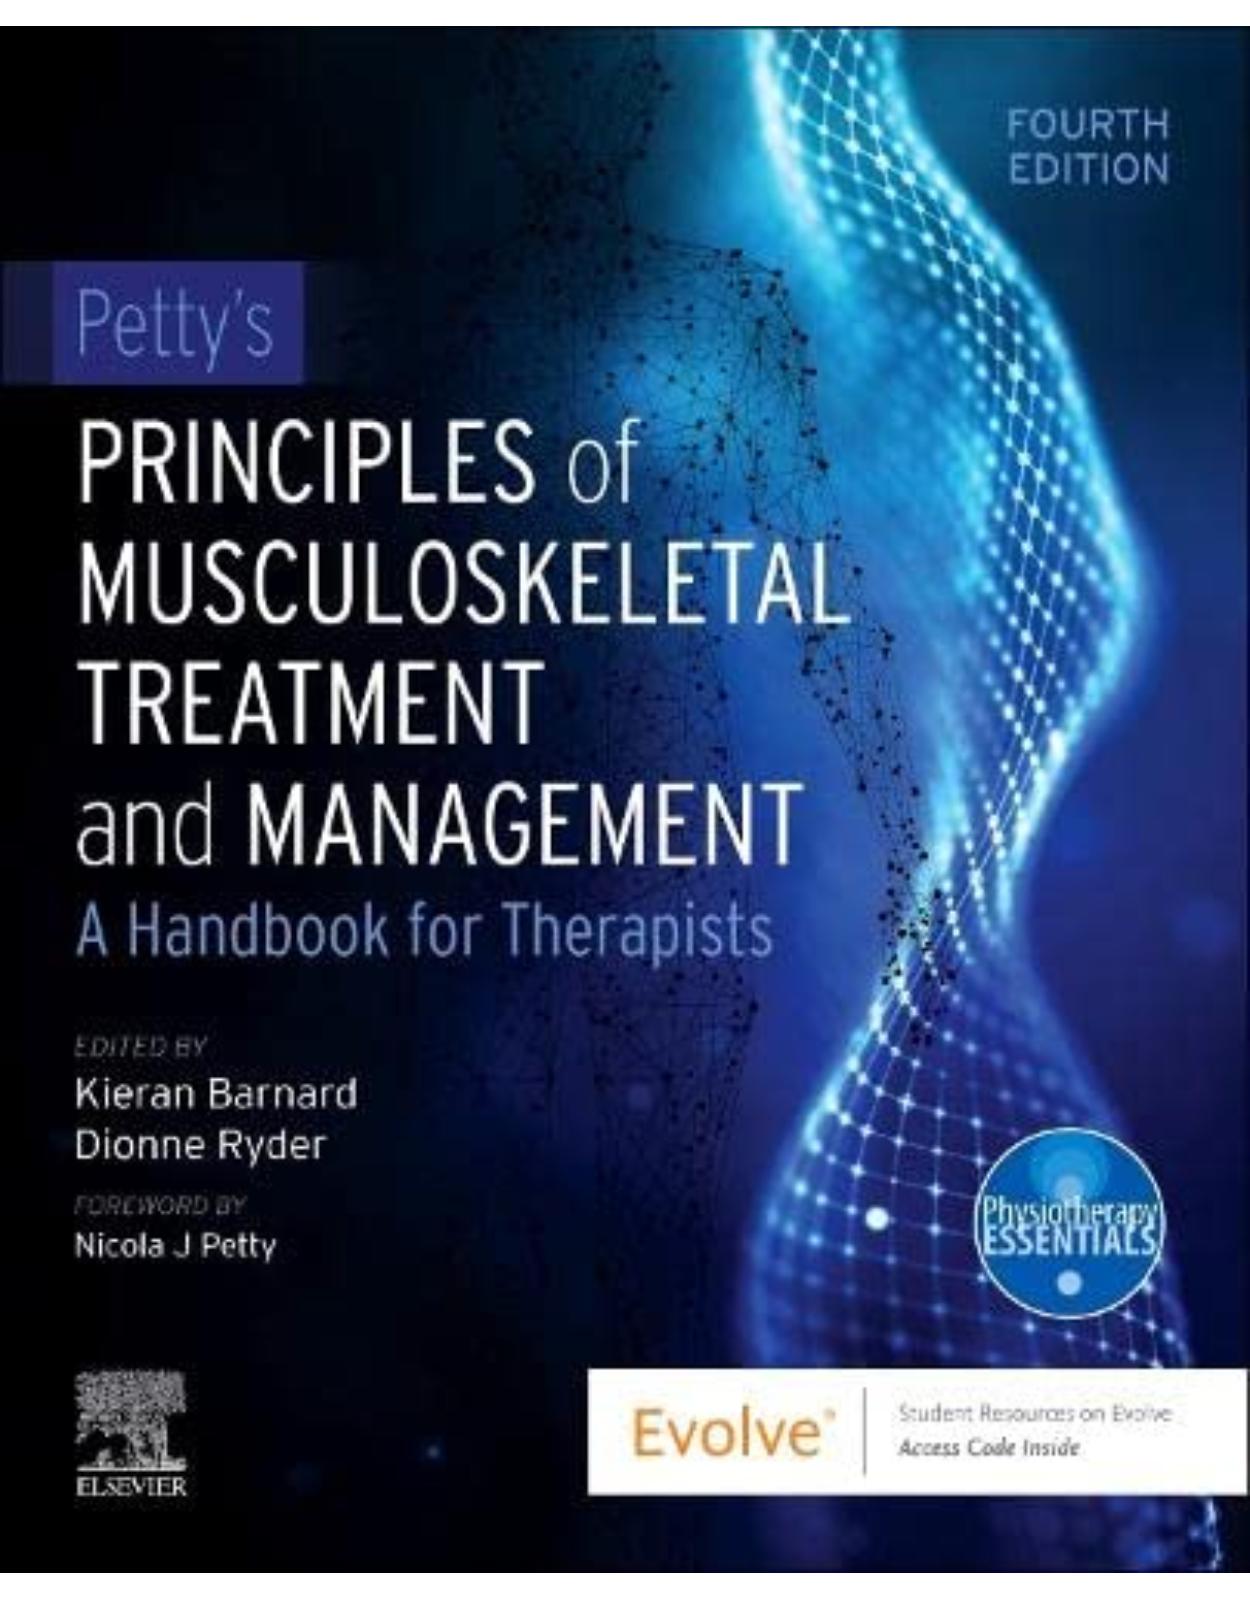 Petty’s Principles of Musculoskeletal Treatment and Management: A Handbook for Therapists